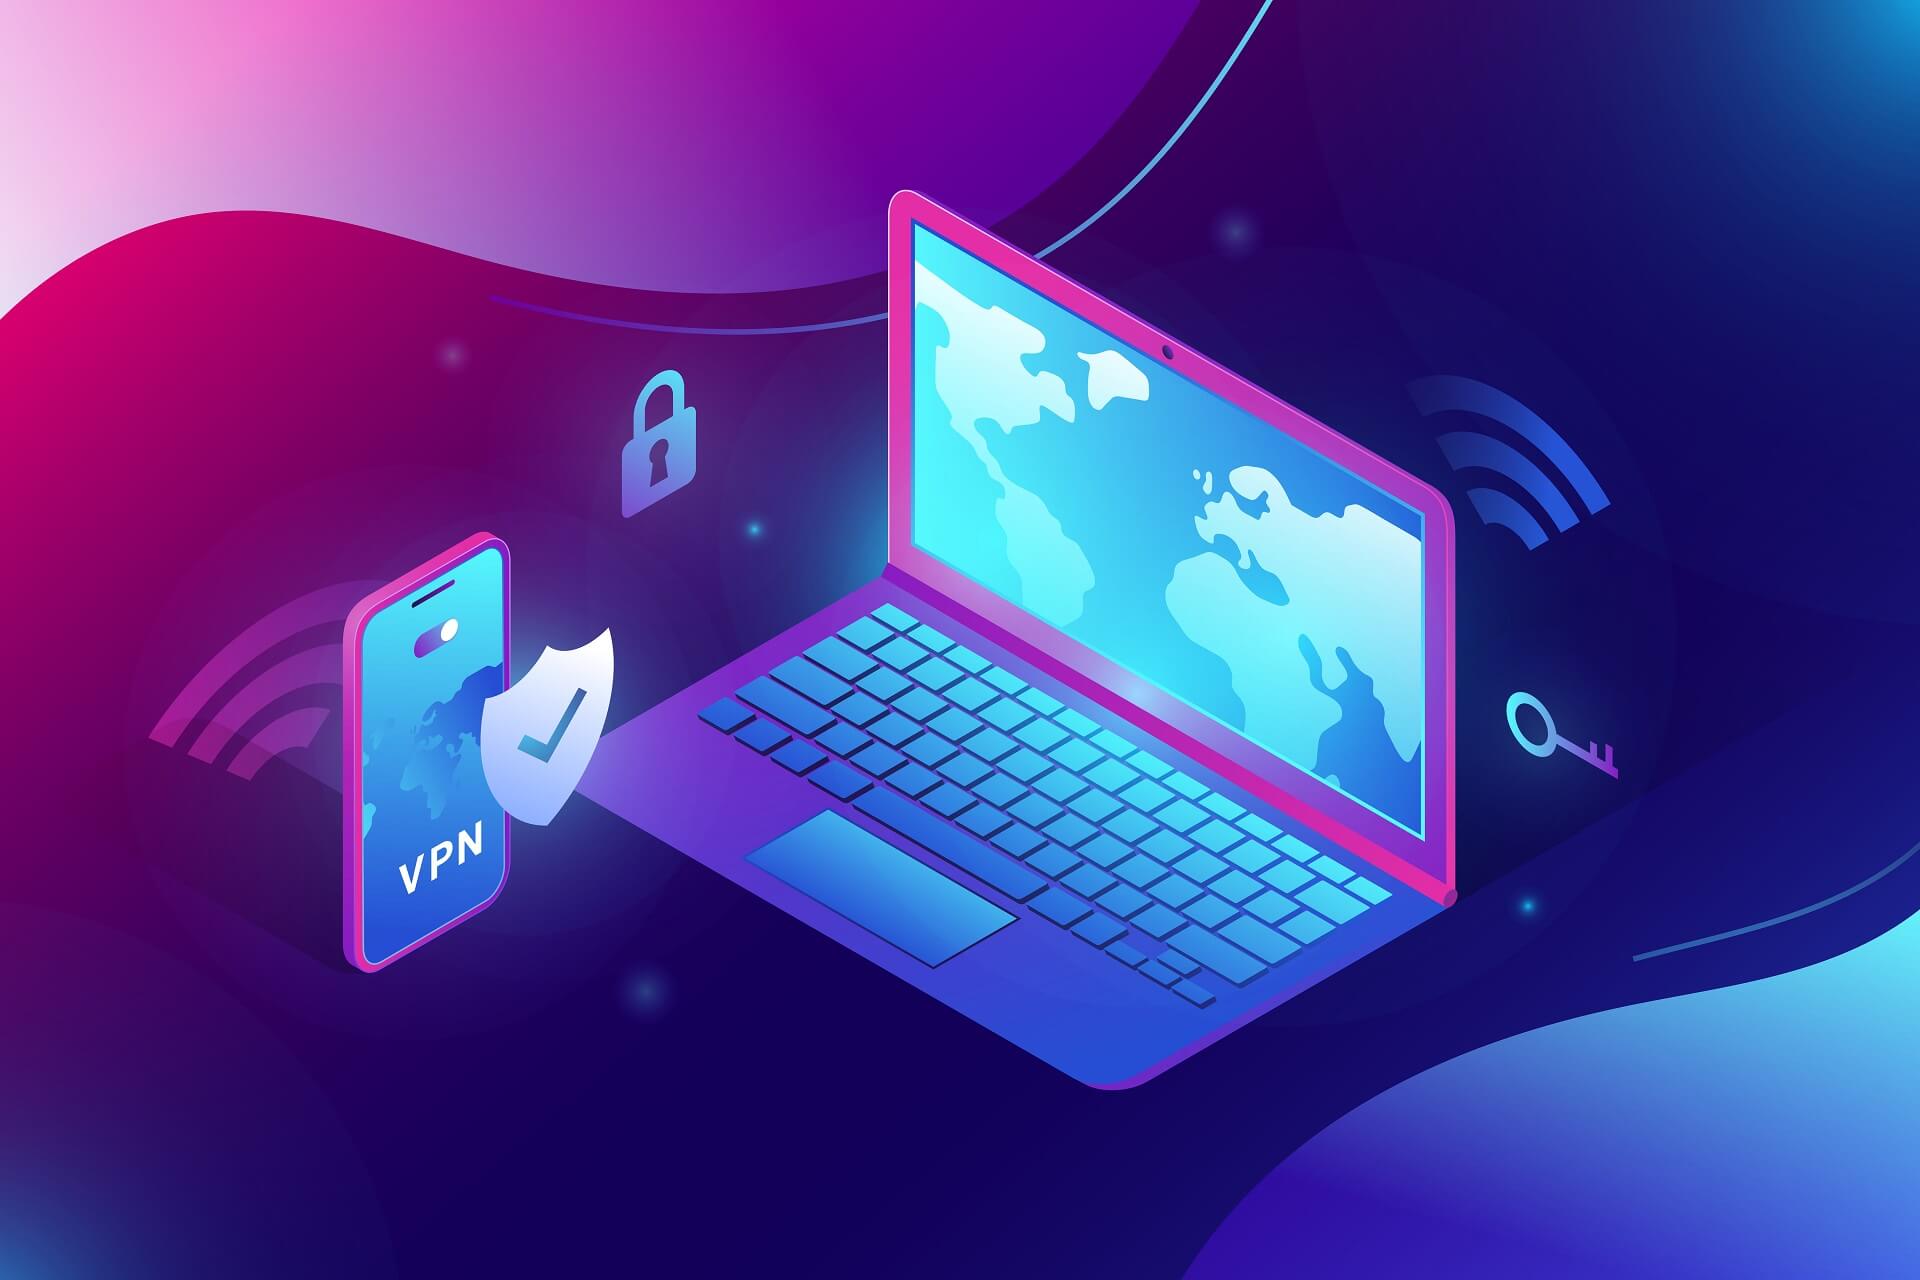 what is the best vpn for windows 10